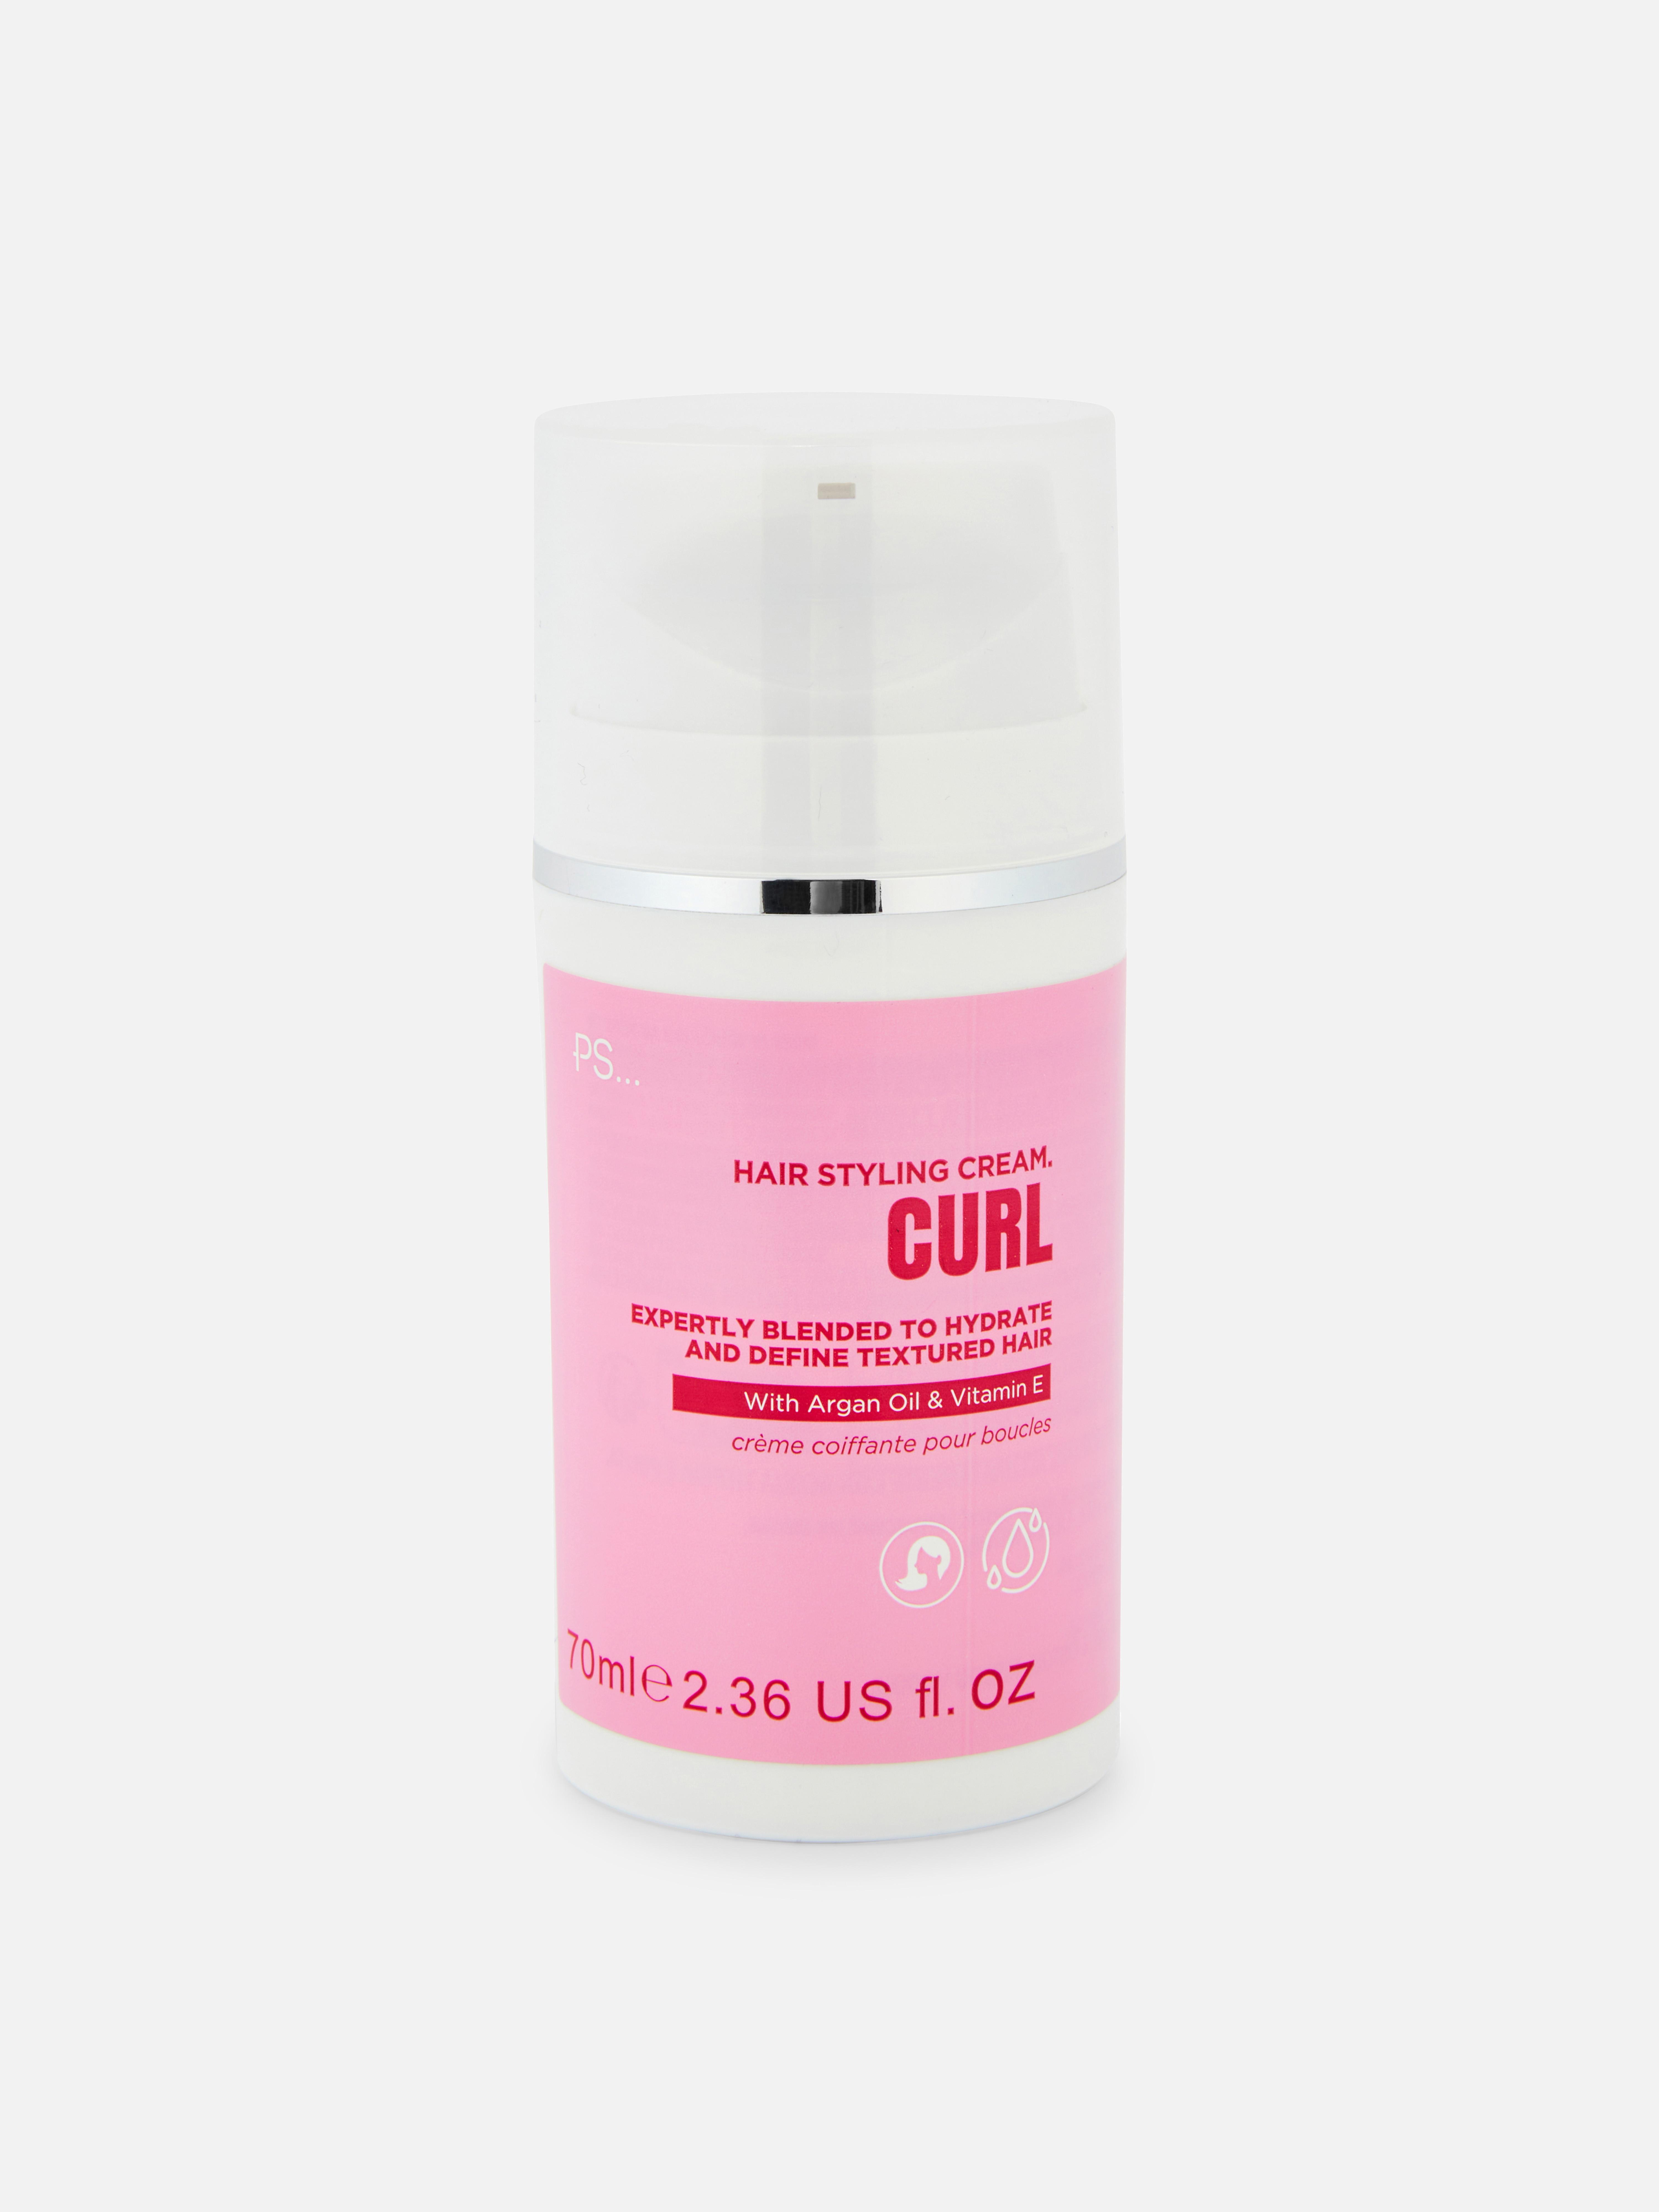 PS Curl Hair Styling Cream